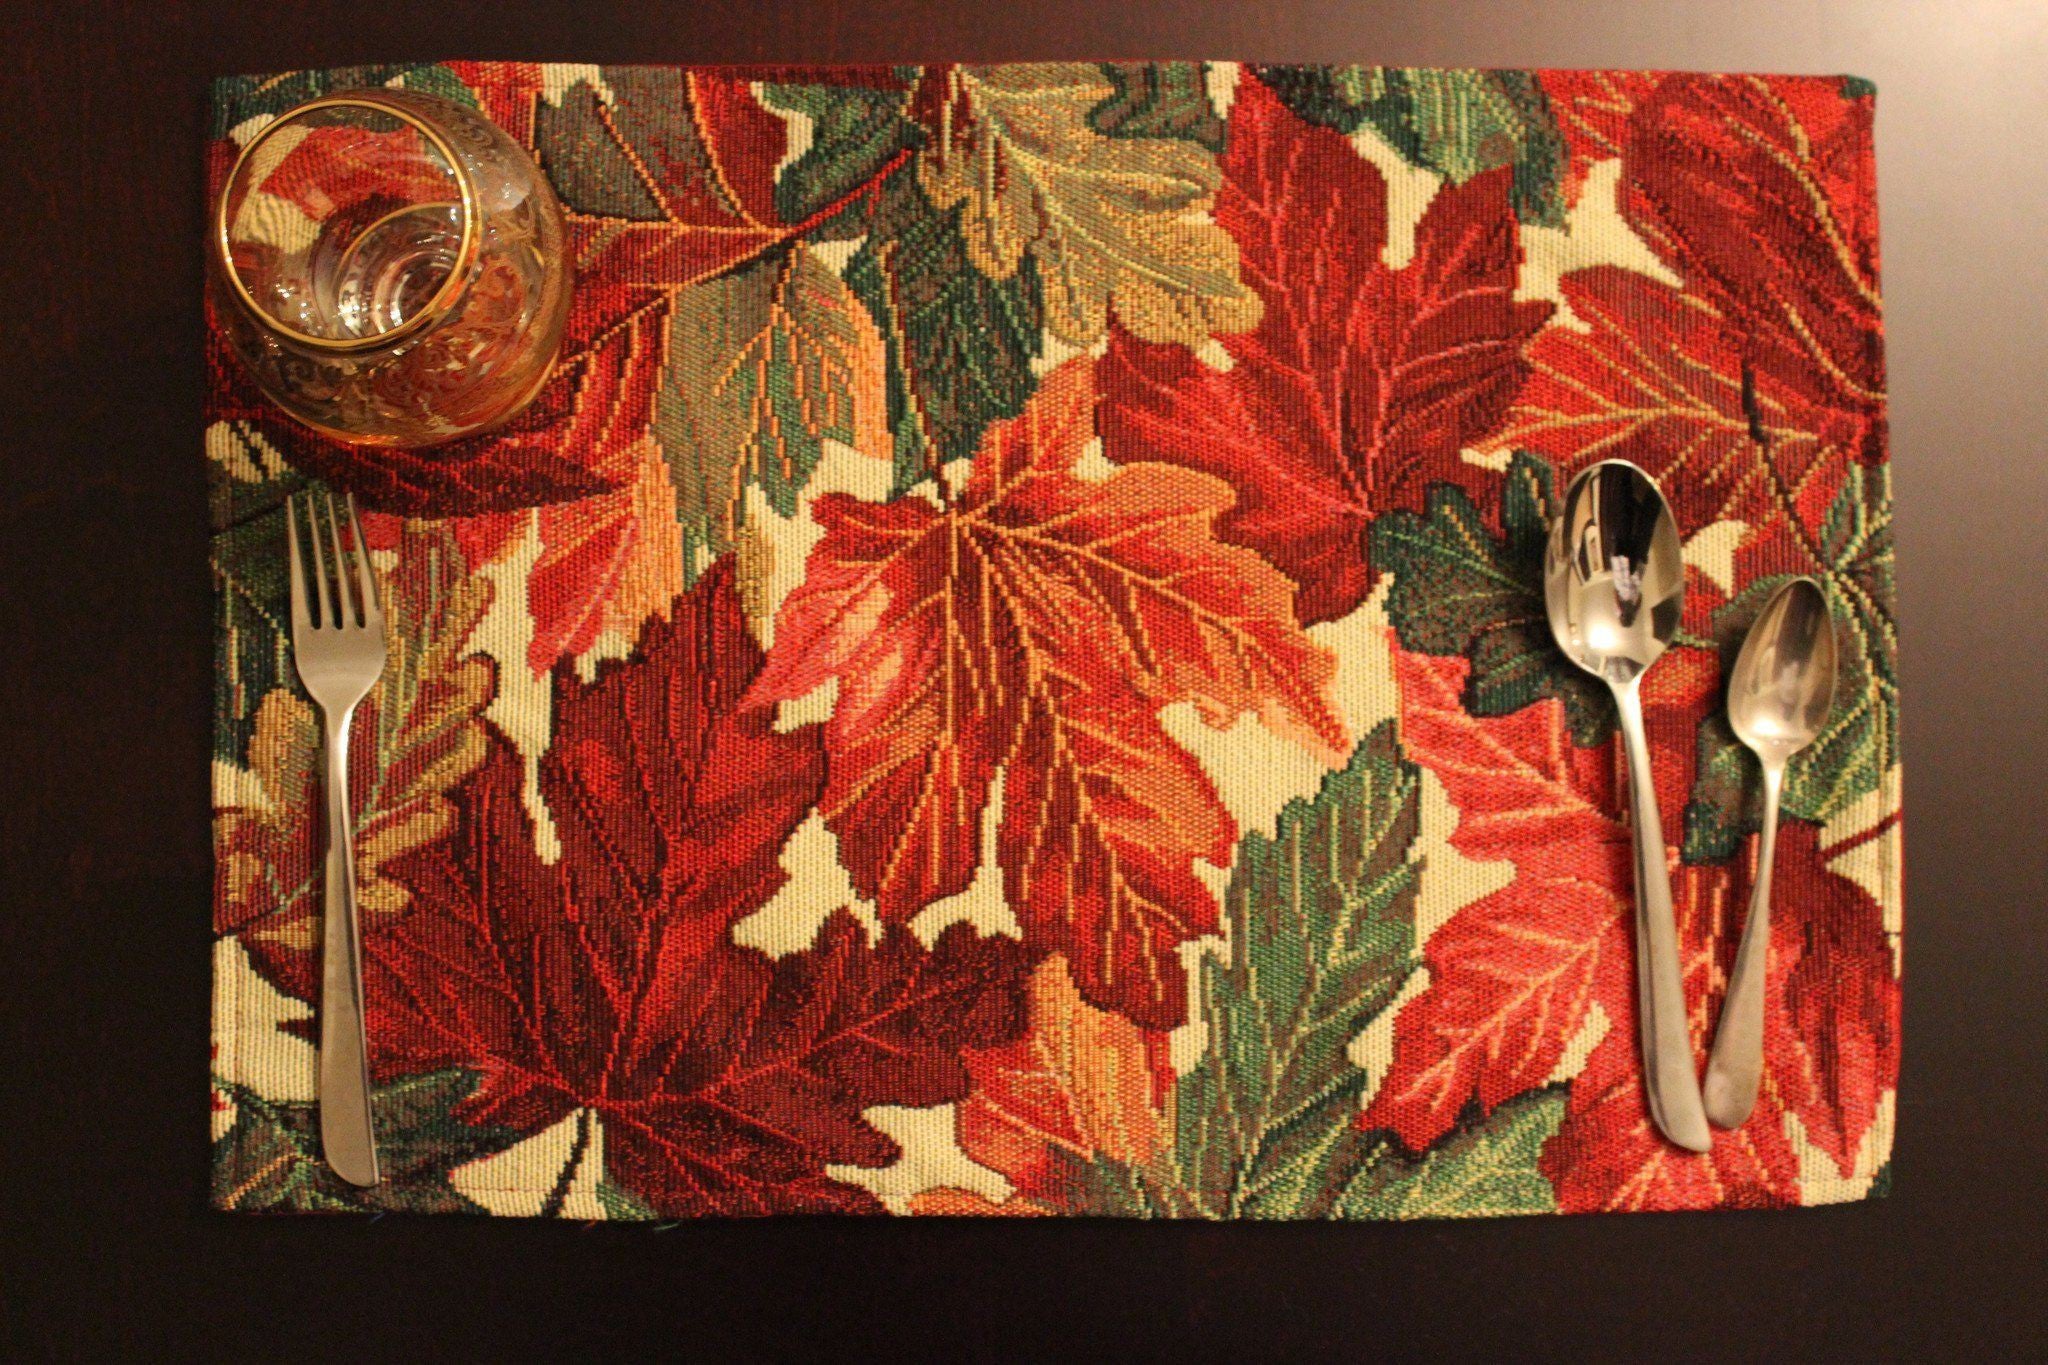 Tache 8 Piece Thanksgiving Leaves Fall Foliage Tapestry Table Linen Set - Tache Home Fashion